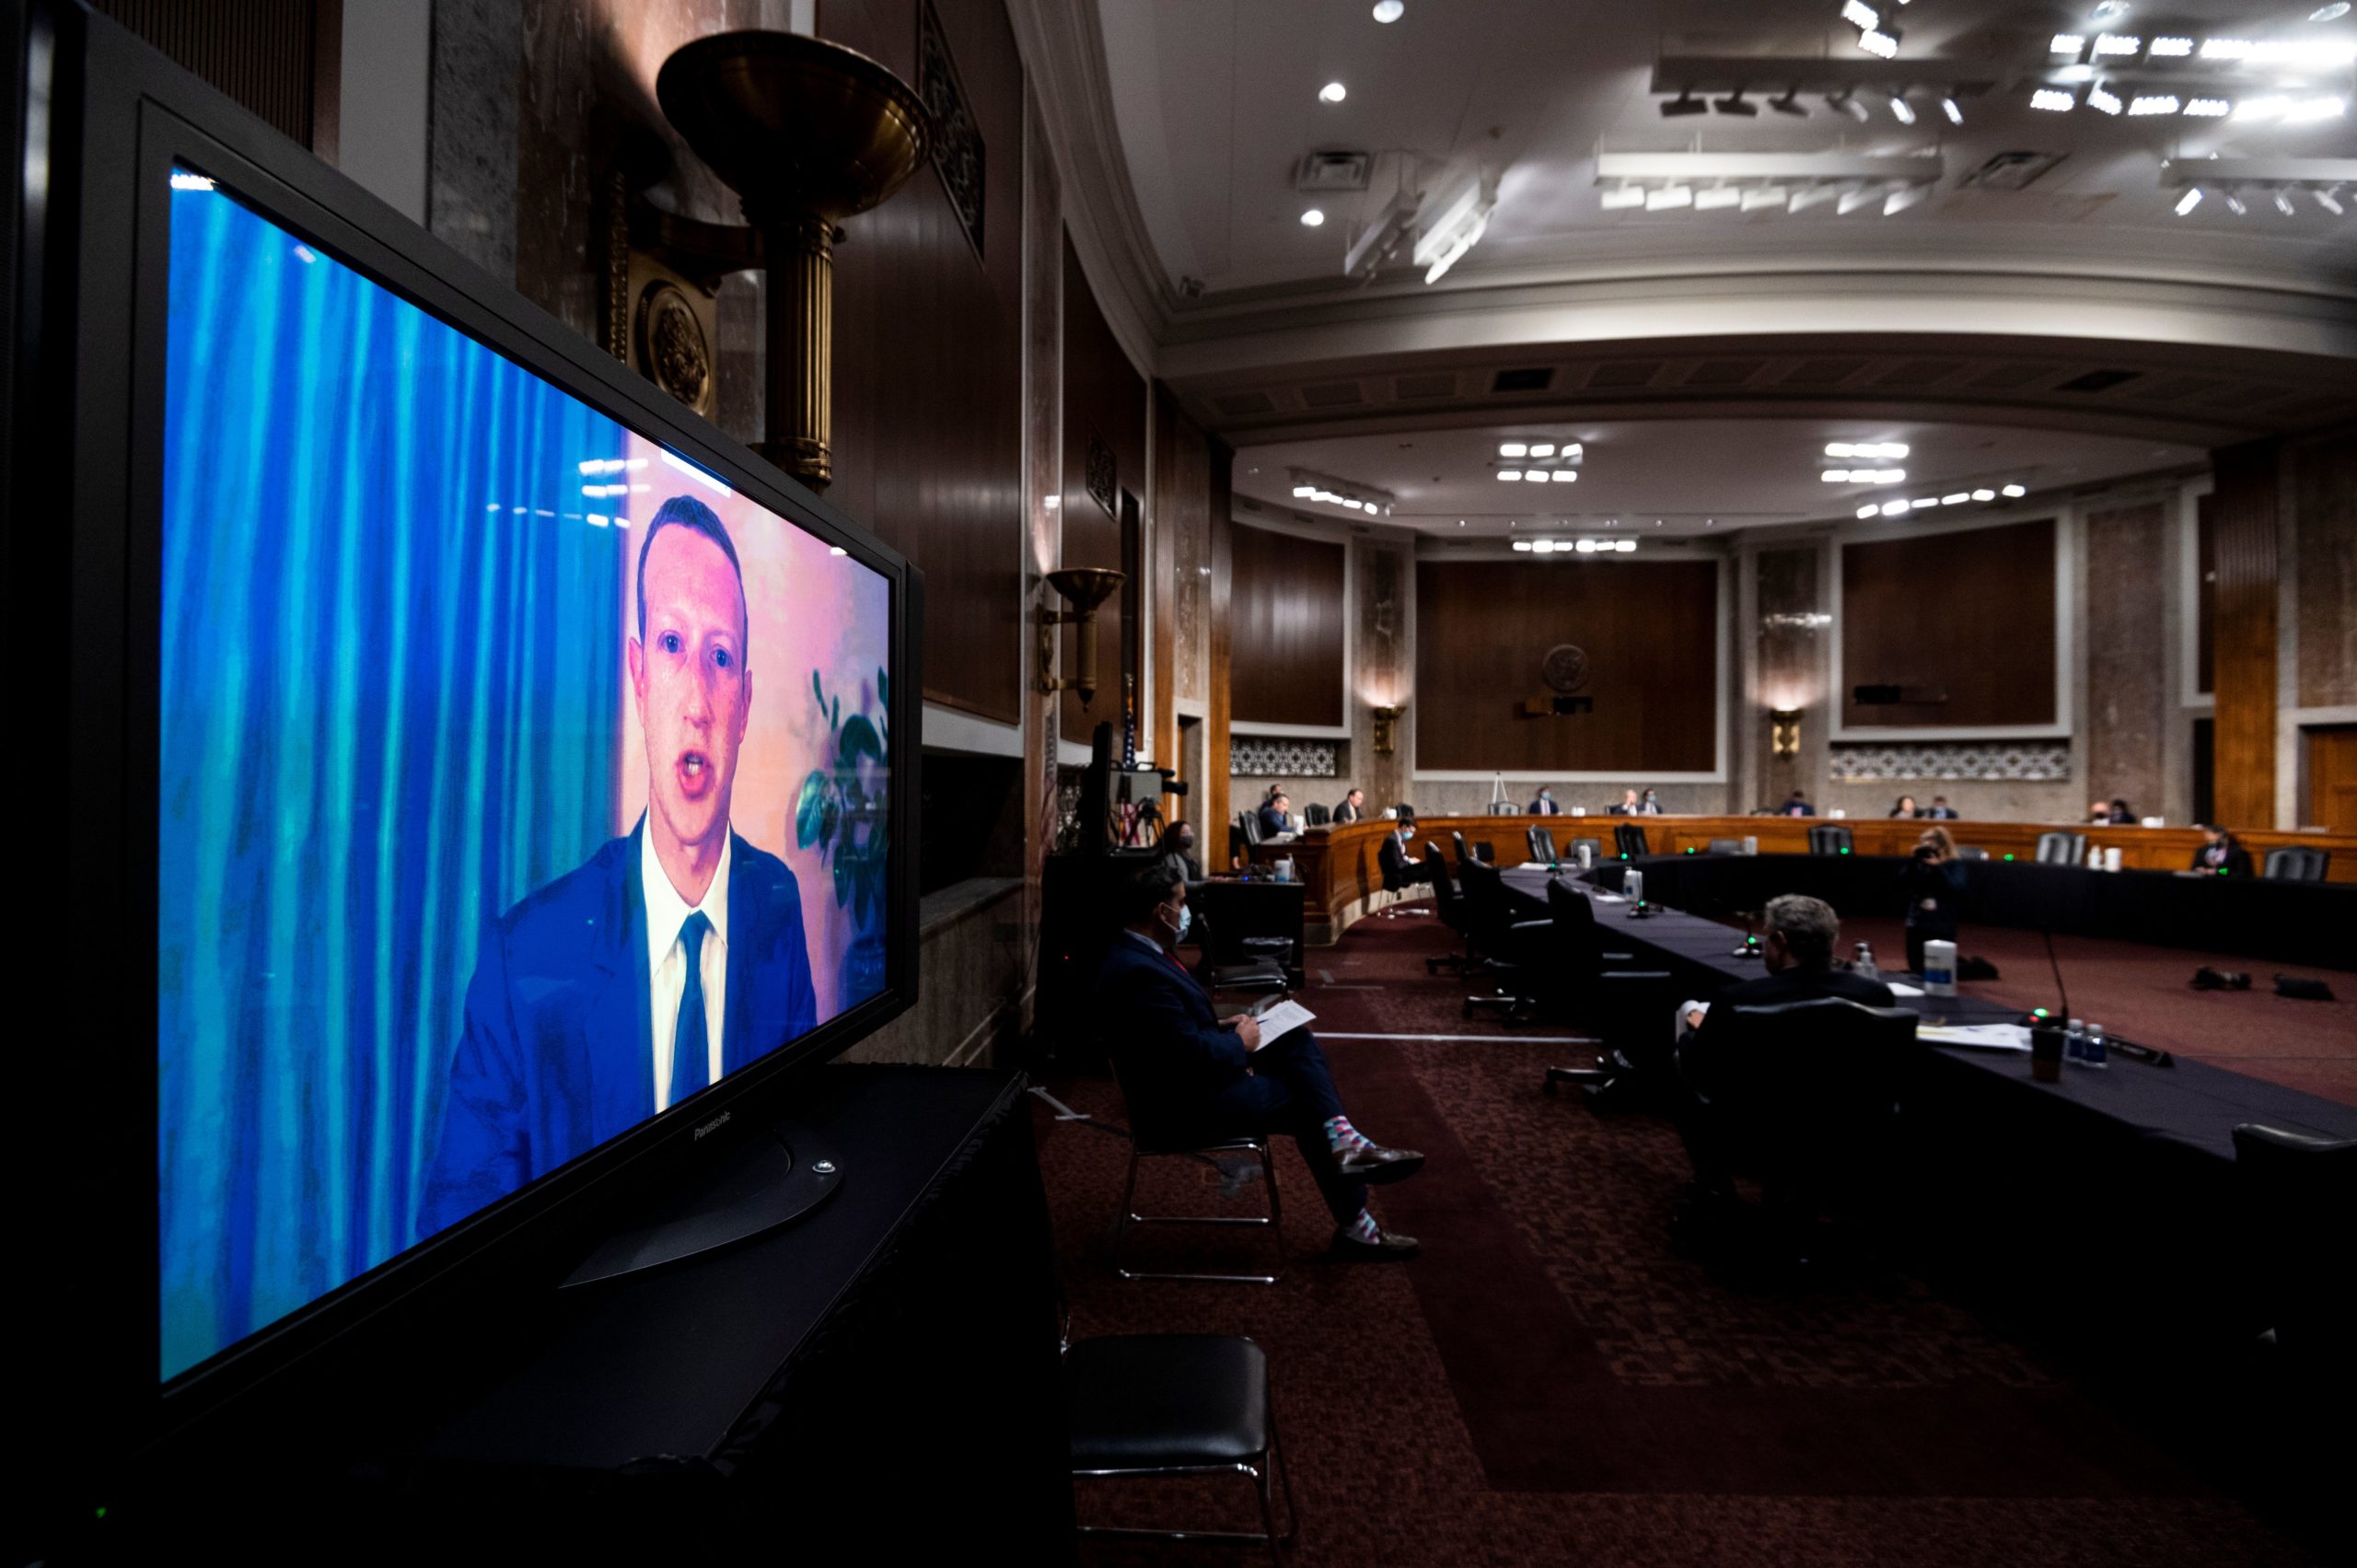 Facebook CEO Mark Zuckerberg testifies remotely during a Senate Judiciary Committee hearing on Nov. 17. (Bill Clark/Pool/AFP via Getty Images)